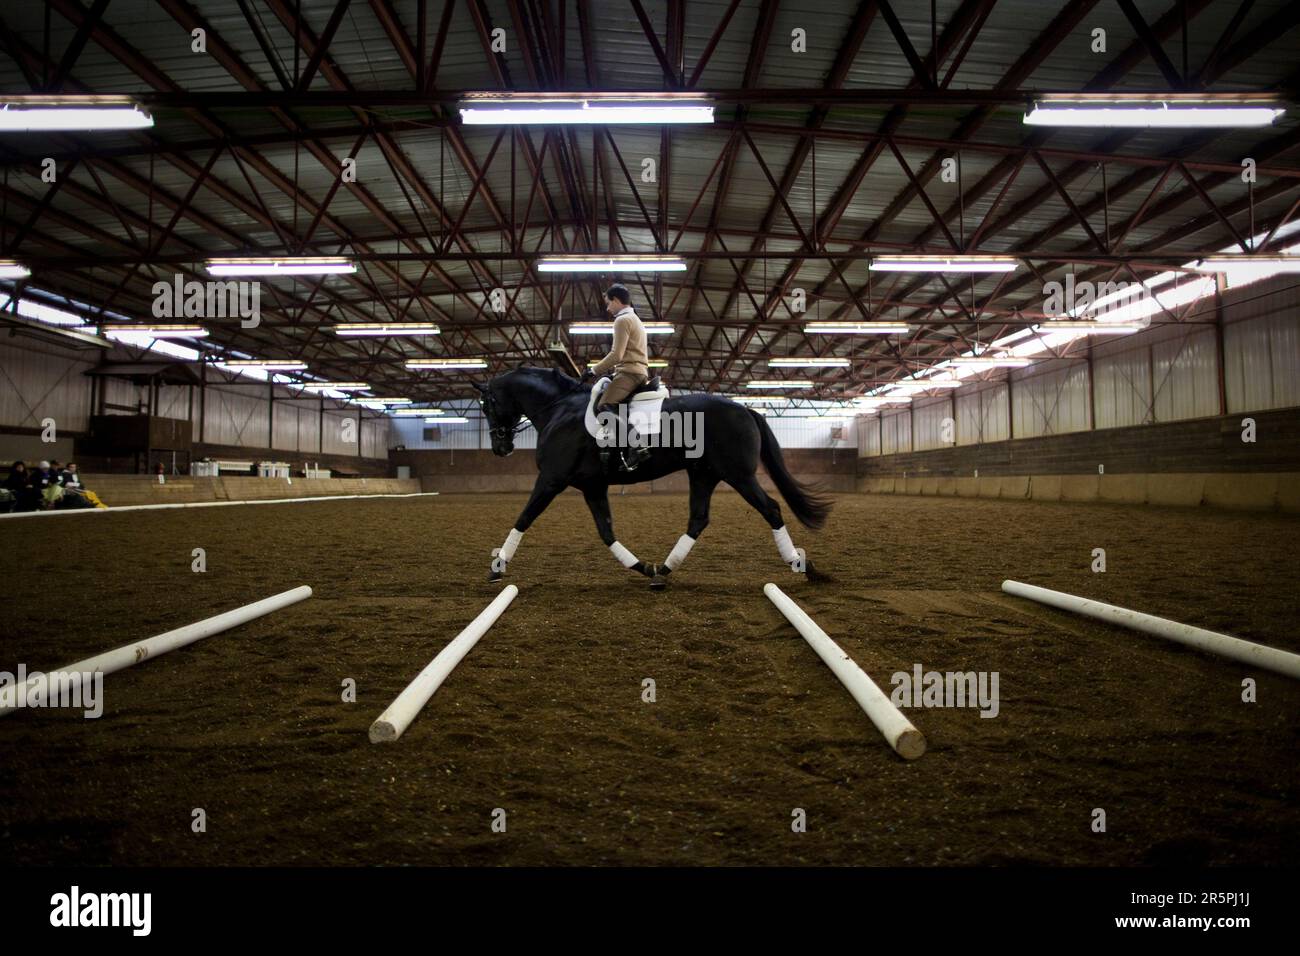 A dressage equestrian rides a horse in an indoor arena during a clinic, Alpine Farms in Medina, Minnesota. Stock Photo